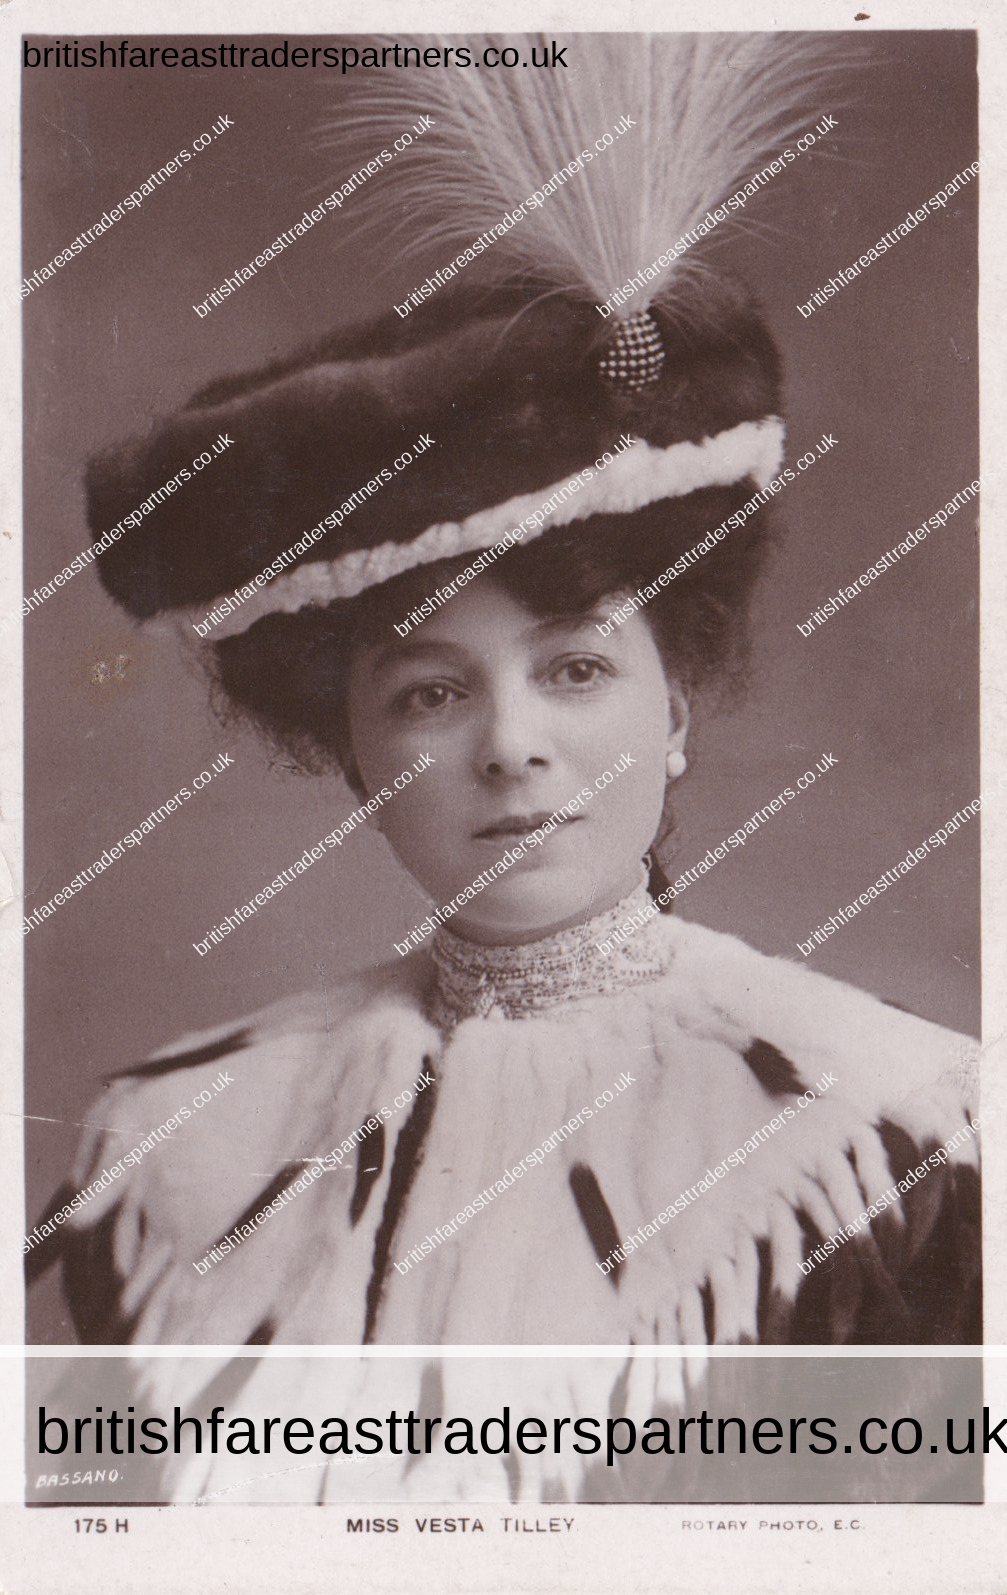 ANTIQUE COLLECTABLE POSTCARDS “MISS VESTA TILLEY” ROTARY PHOTOGRAPHIC SERIES VINTAGE | BEAUTY | CELEBRITIES | STAGE PERFORMER | FILM MEMORABILIA | BRITISH